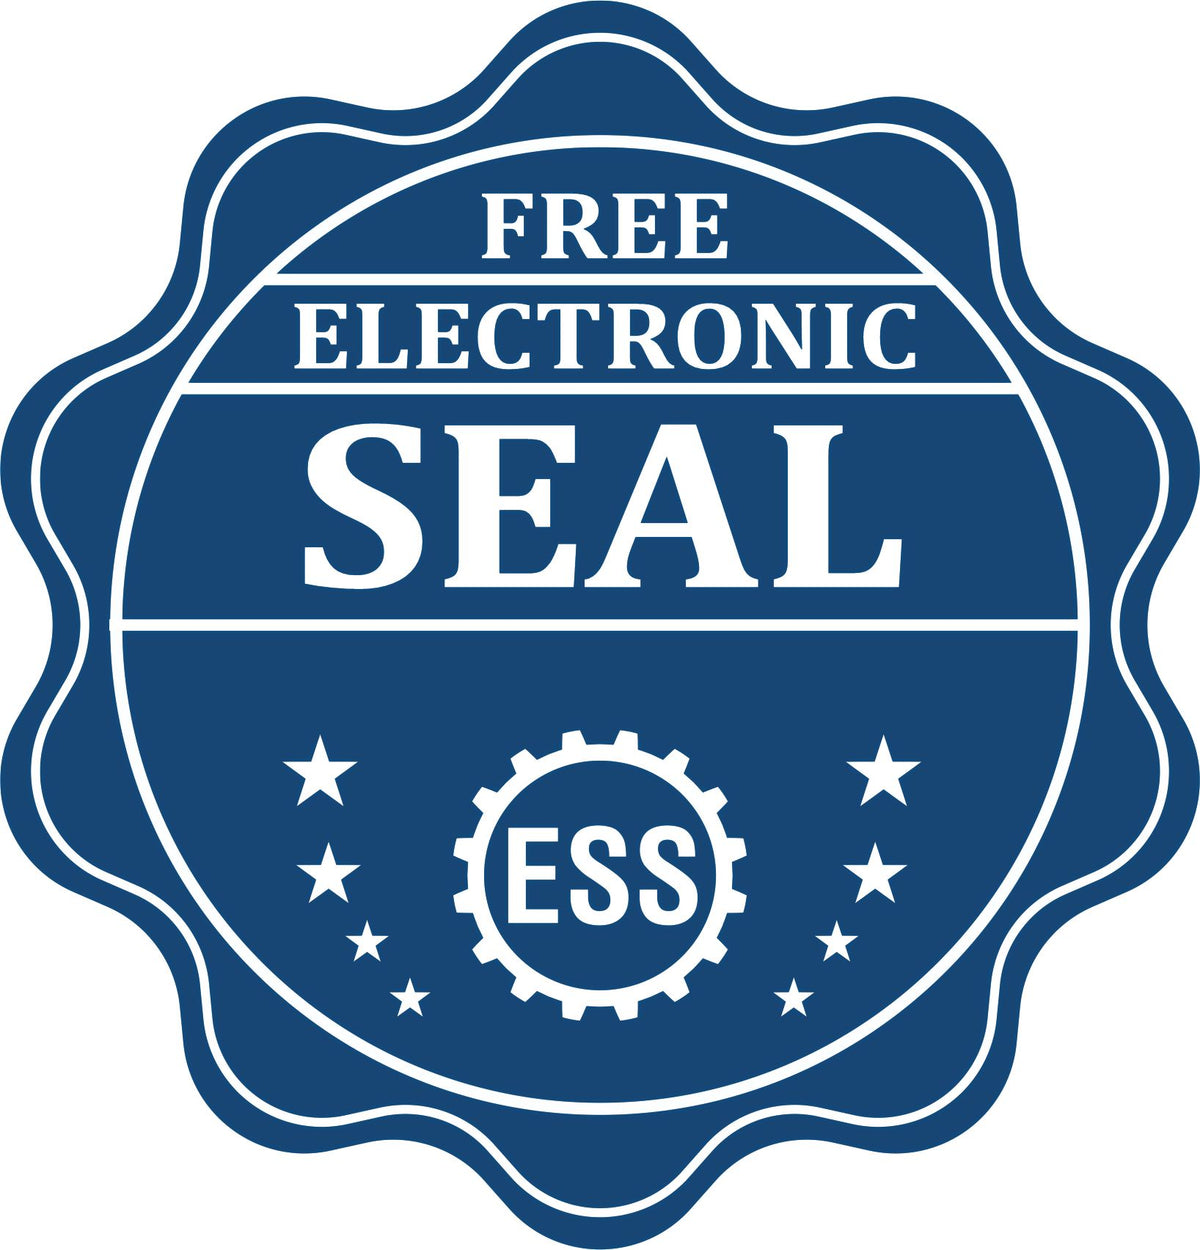 A badge showing a free electronic seal for the State of New Mexico Extended Long Reach Engineer Seal with stars and the ESS gear on the emblem.